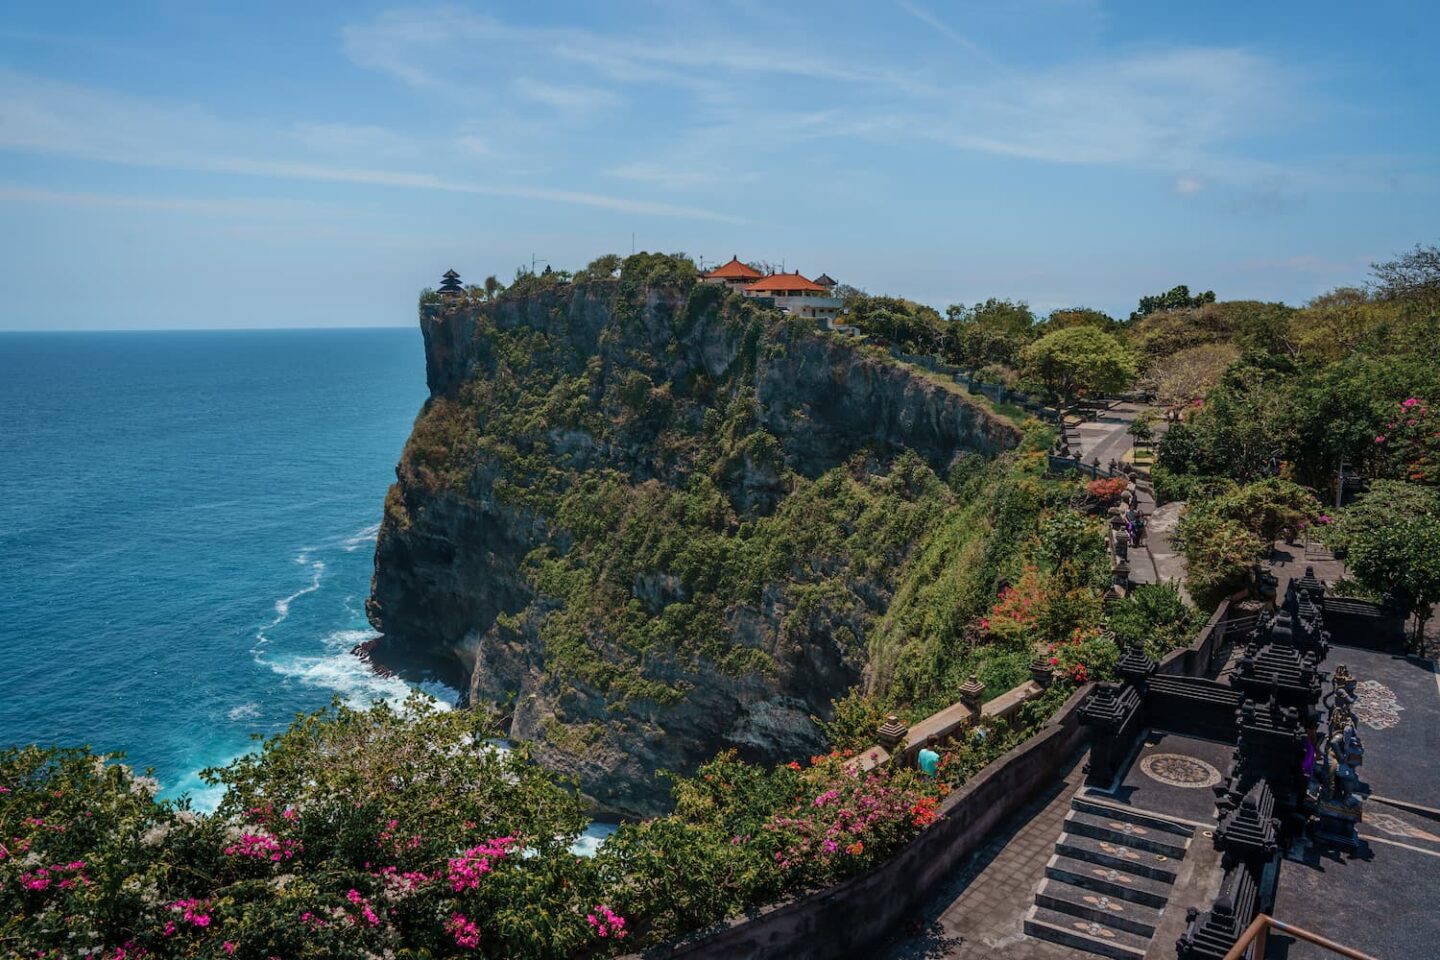 Uluwatu Temple is a must visit place on your 5 days Bali itinerary.